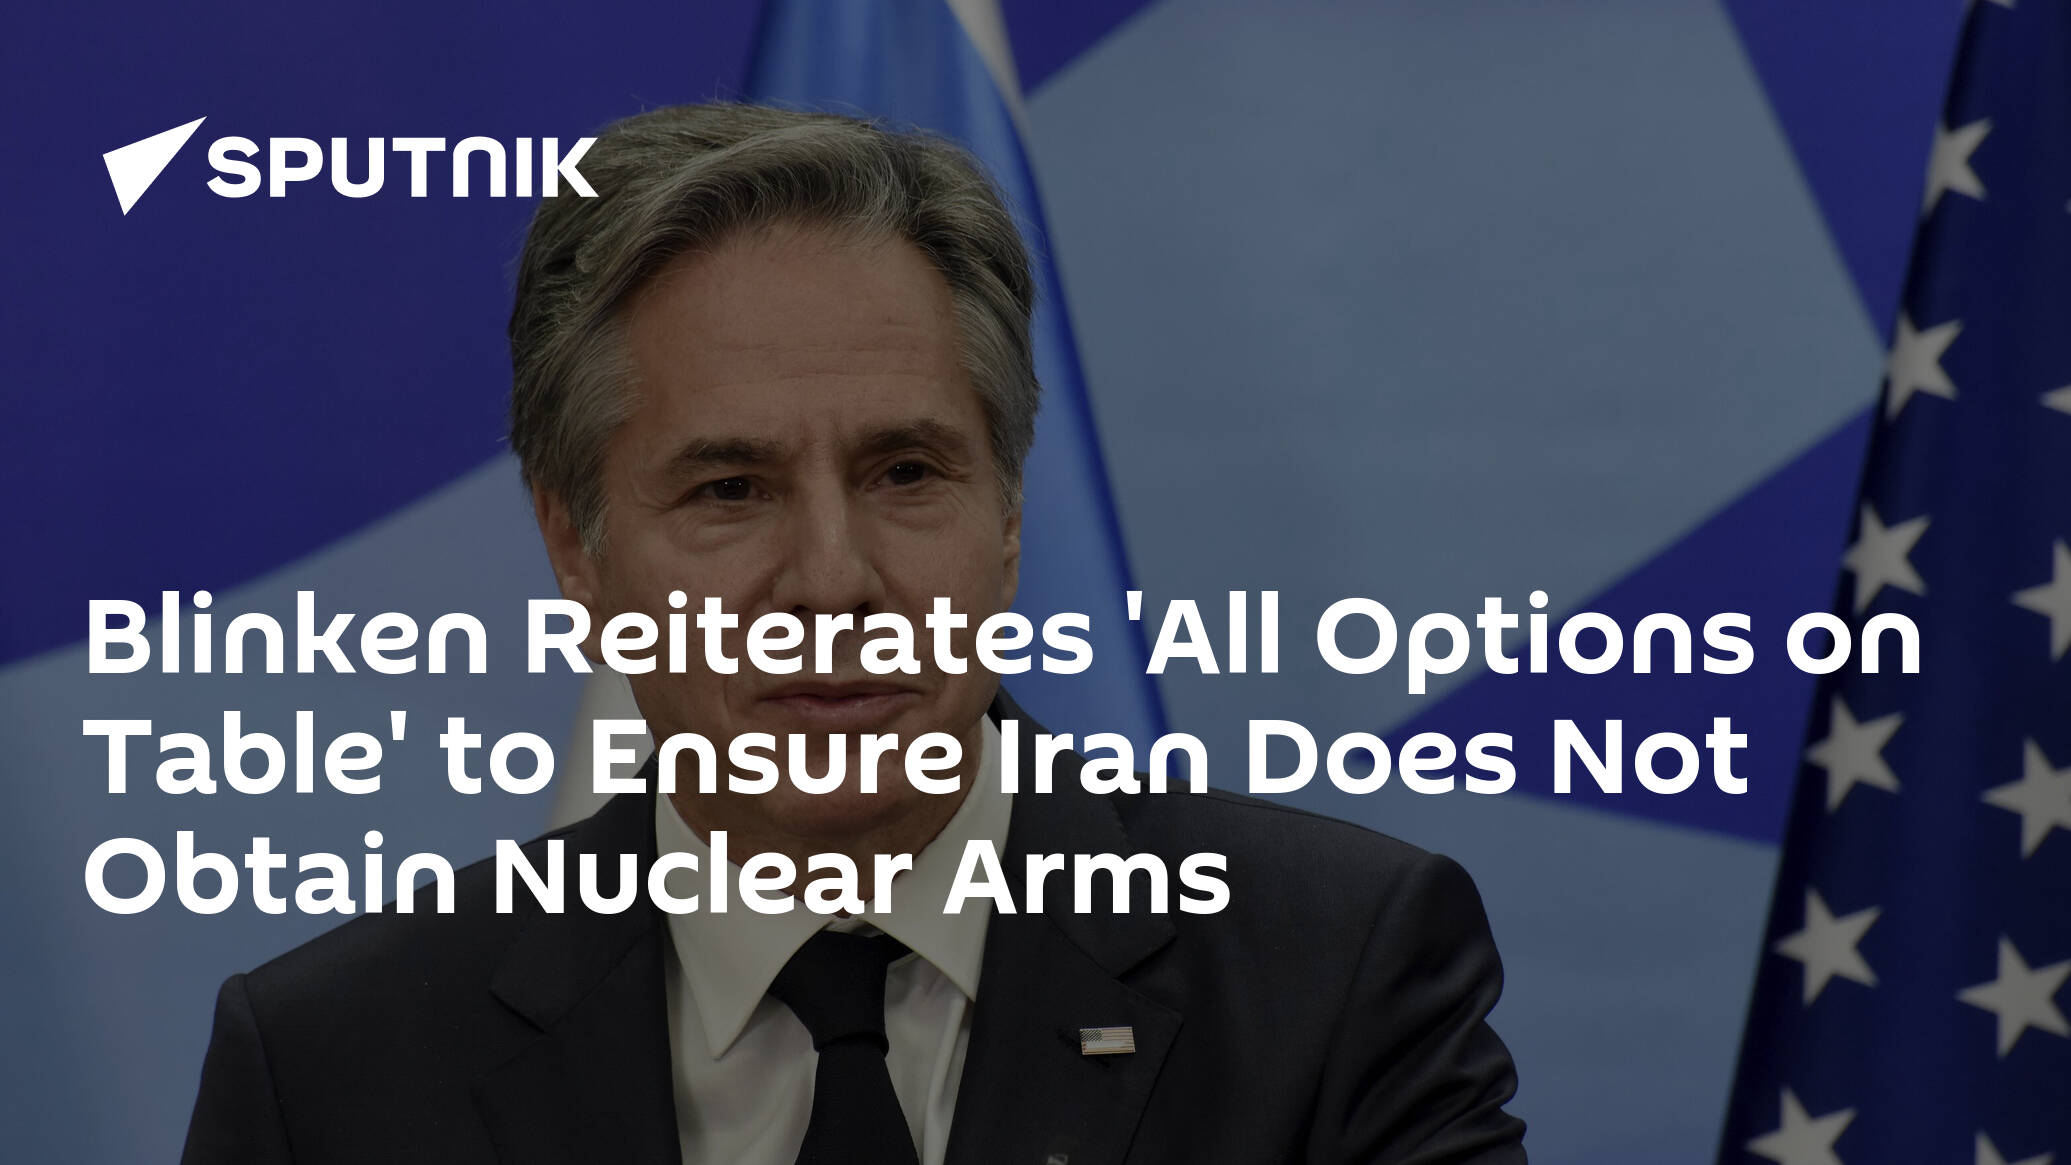 Blinken Reiterates 'All Options on Table' to Ensure Iran Does Not Obtain Nuclear Arms